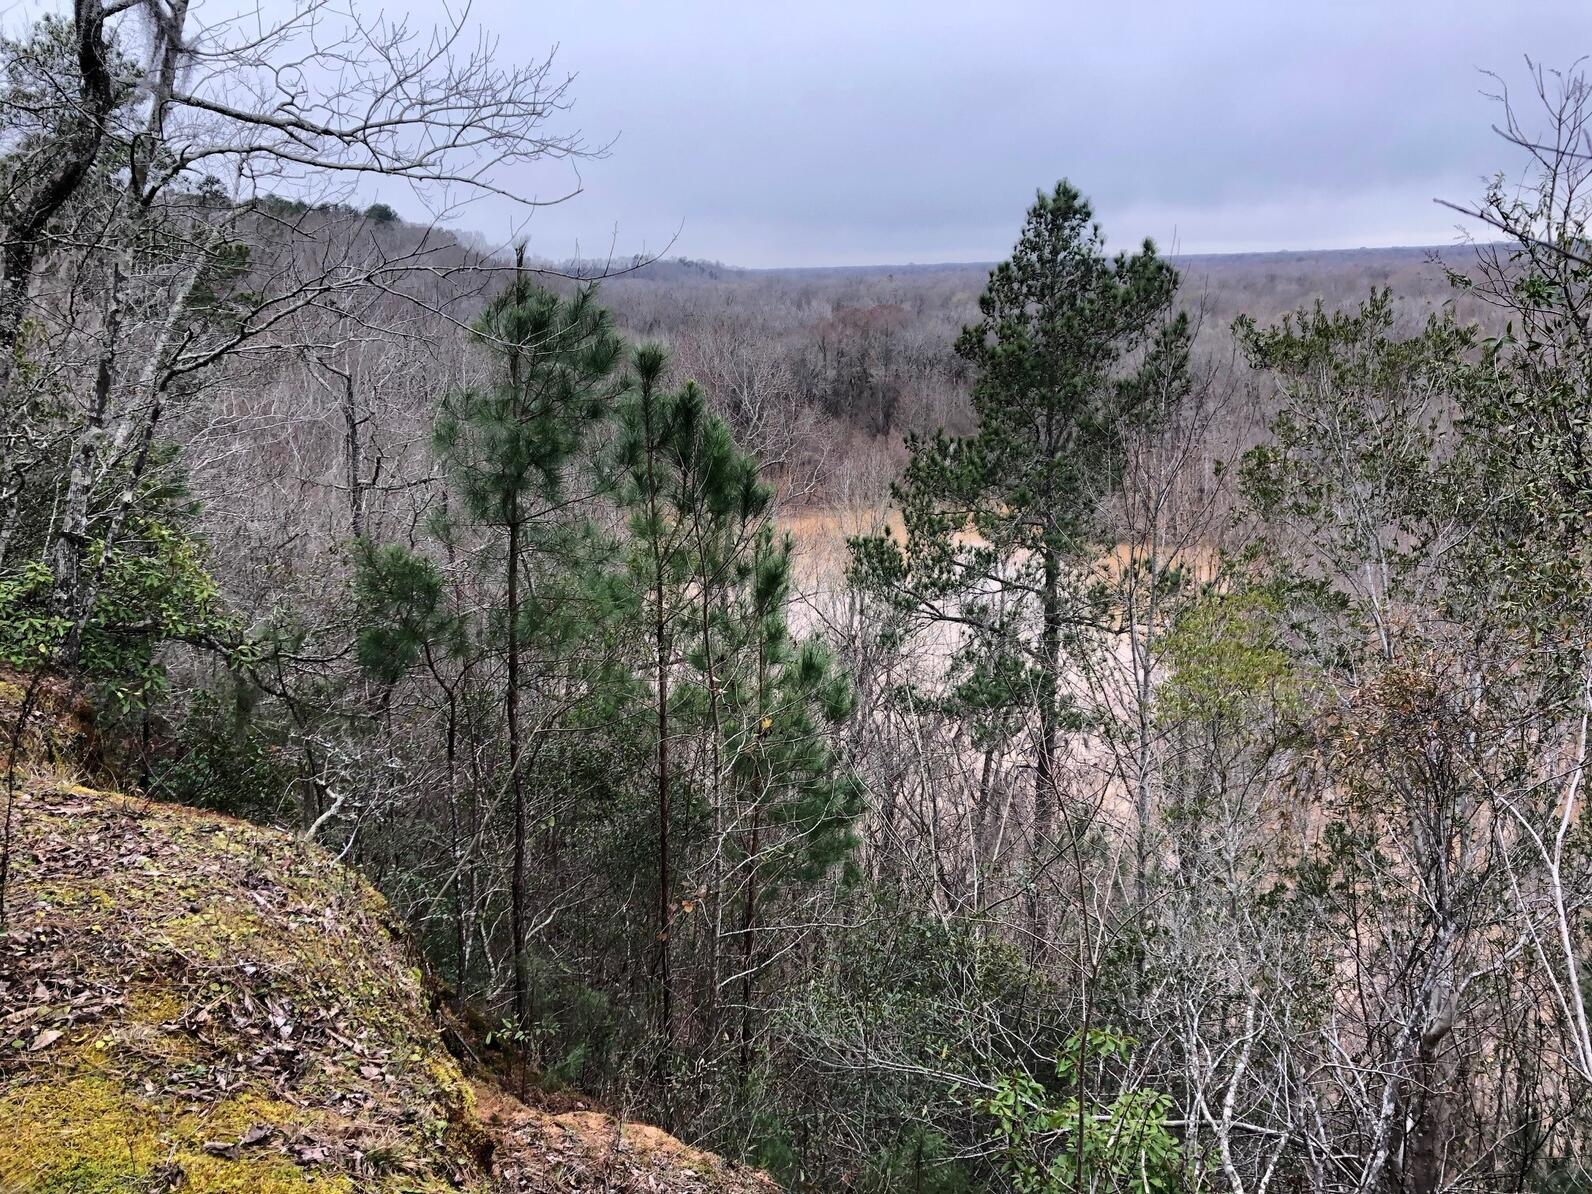 A vast view from high on a bluff along the Congaree River overlooking Congaree National Park during the Christmas Bird Count when the trees were bare and the skies were grey.